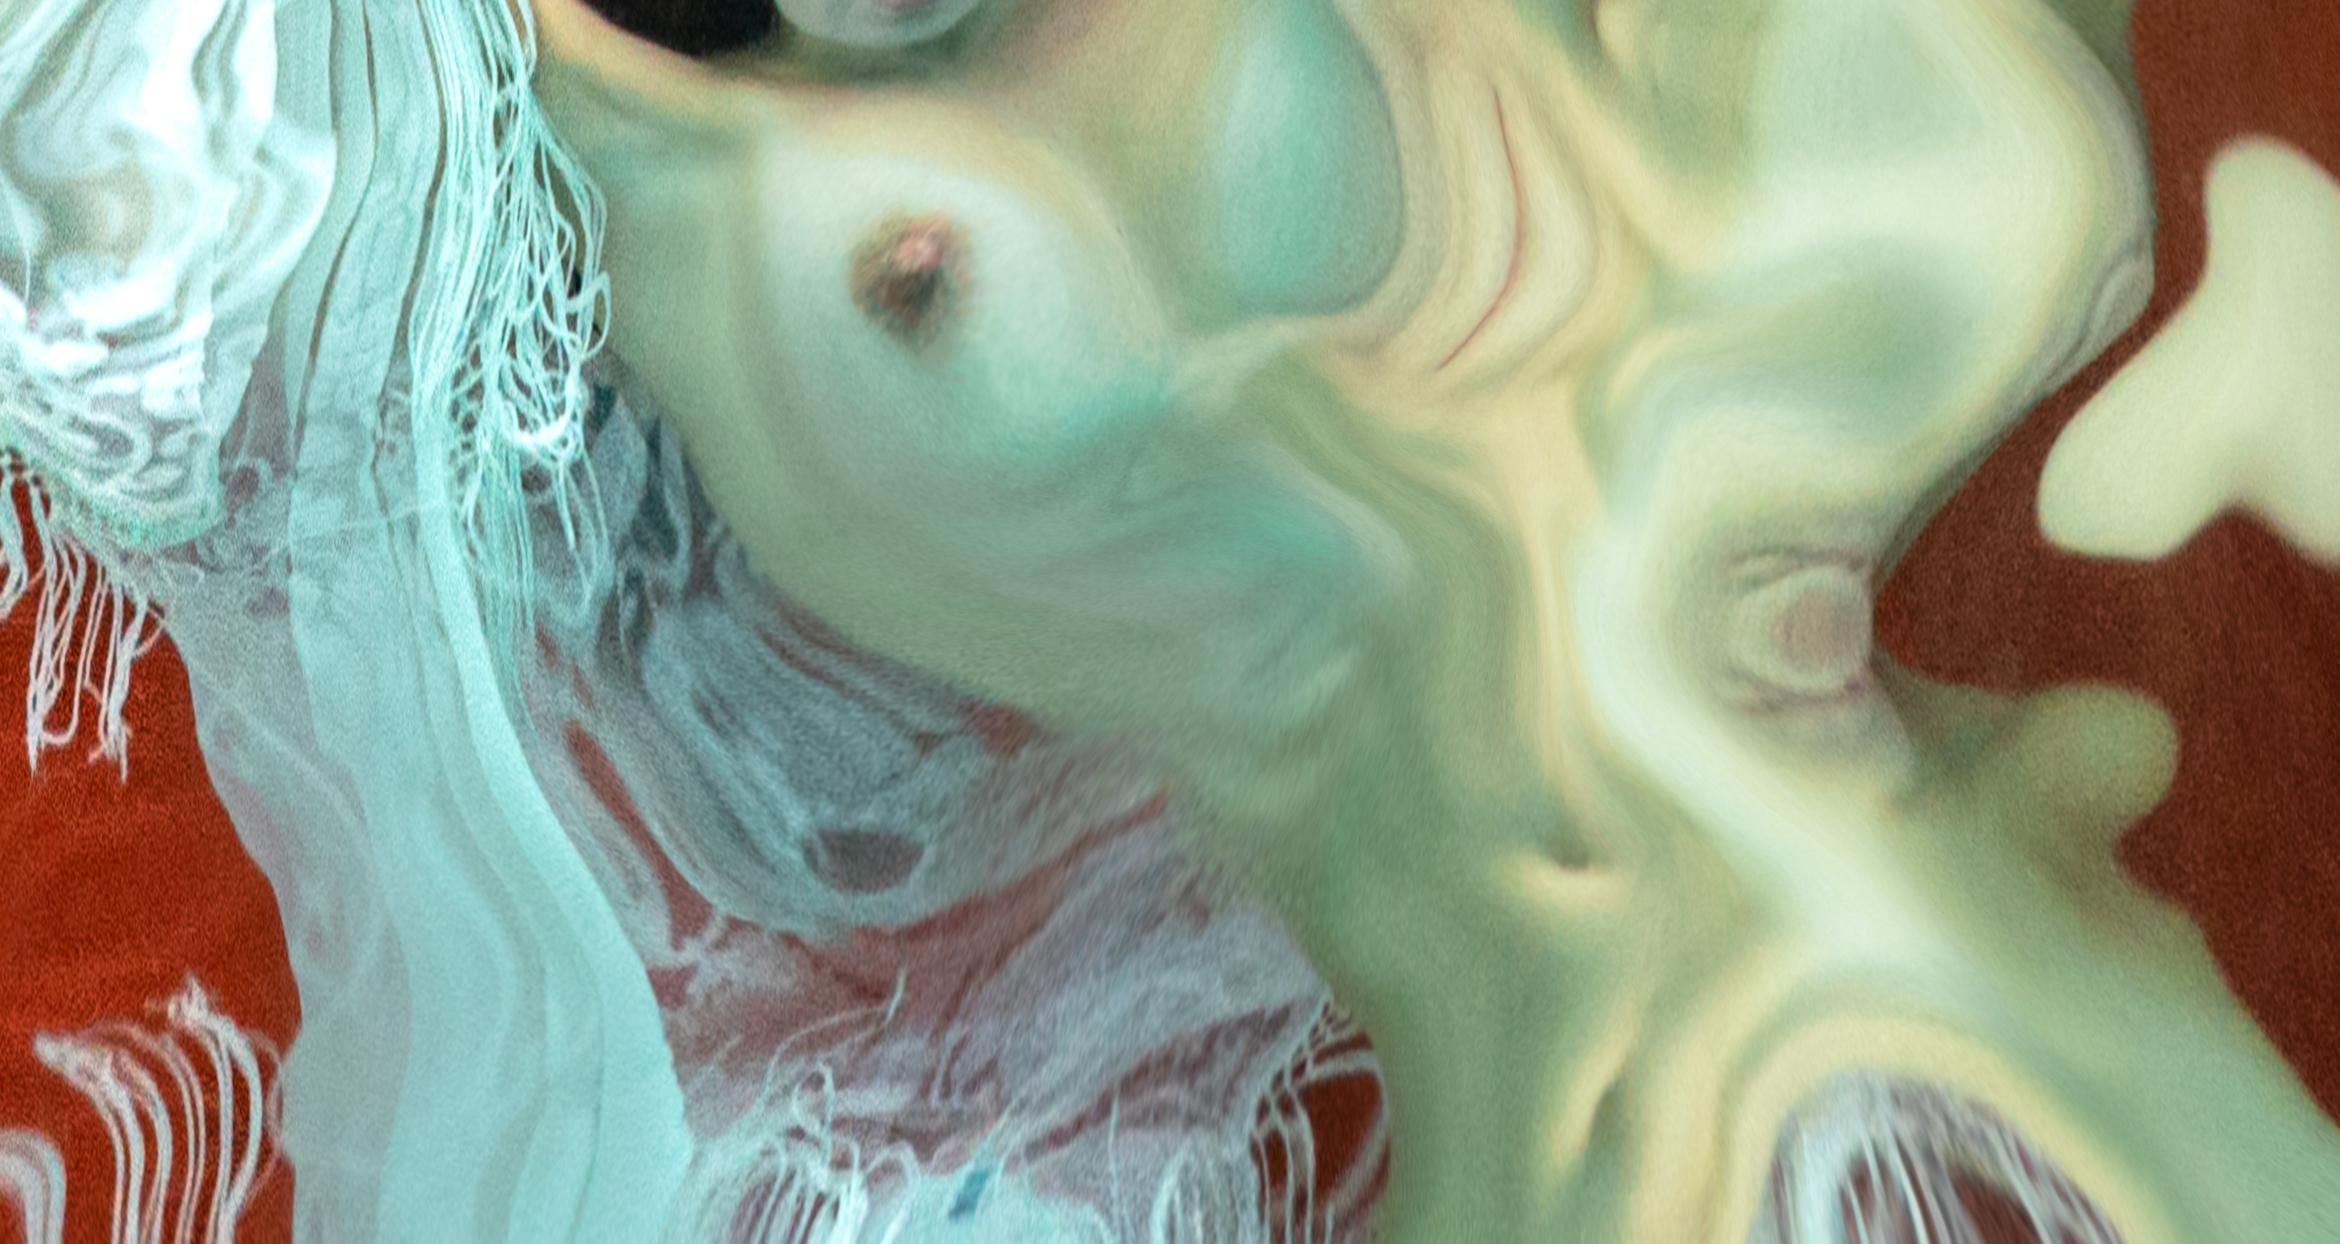 “Prophetess” is a part of Alex Sher’s popular series Reflections - underwater photographs that could be almost mistaken for abstract paintings as they bring up recollections of masterpieces by Picasso, Dali or Edvard Munch. In fact Reflections are